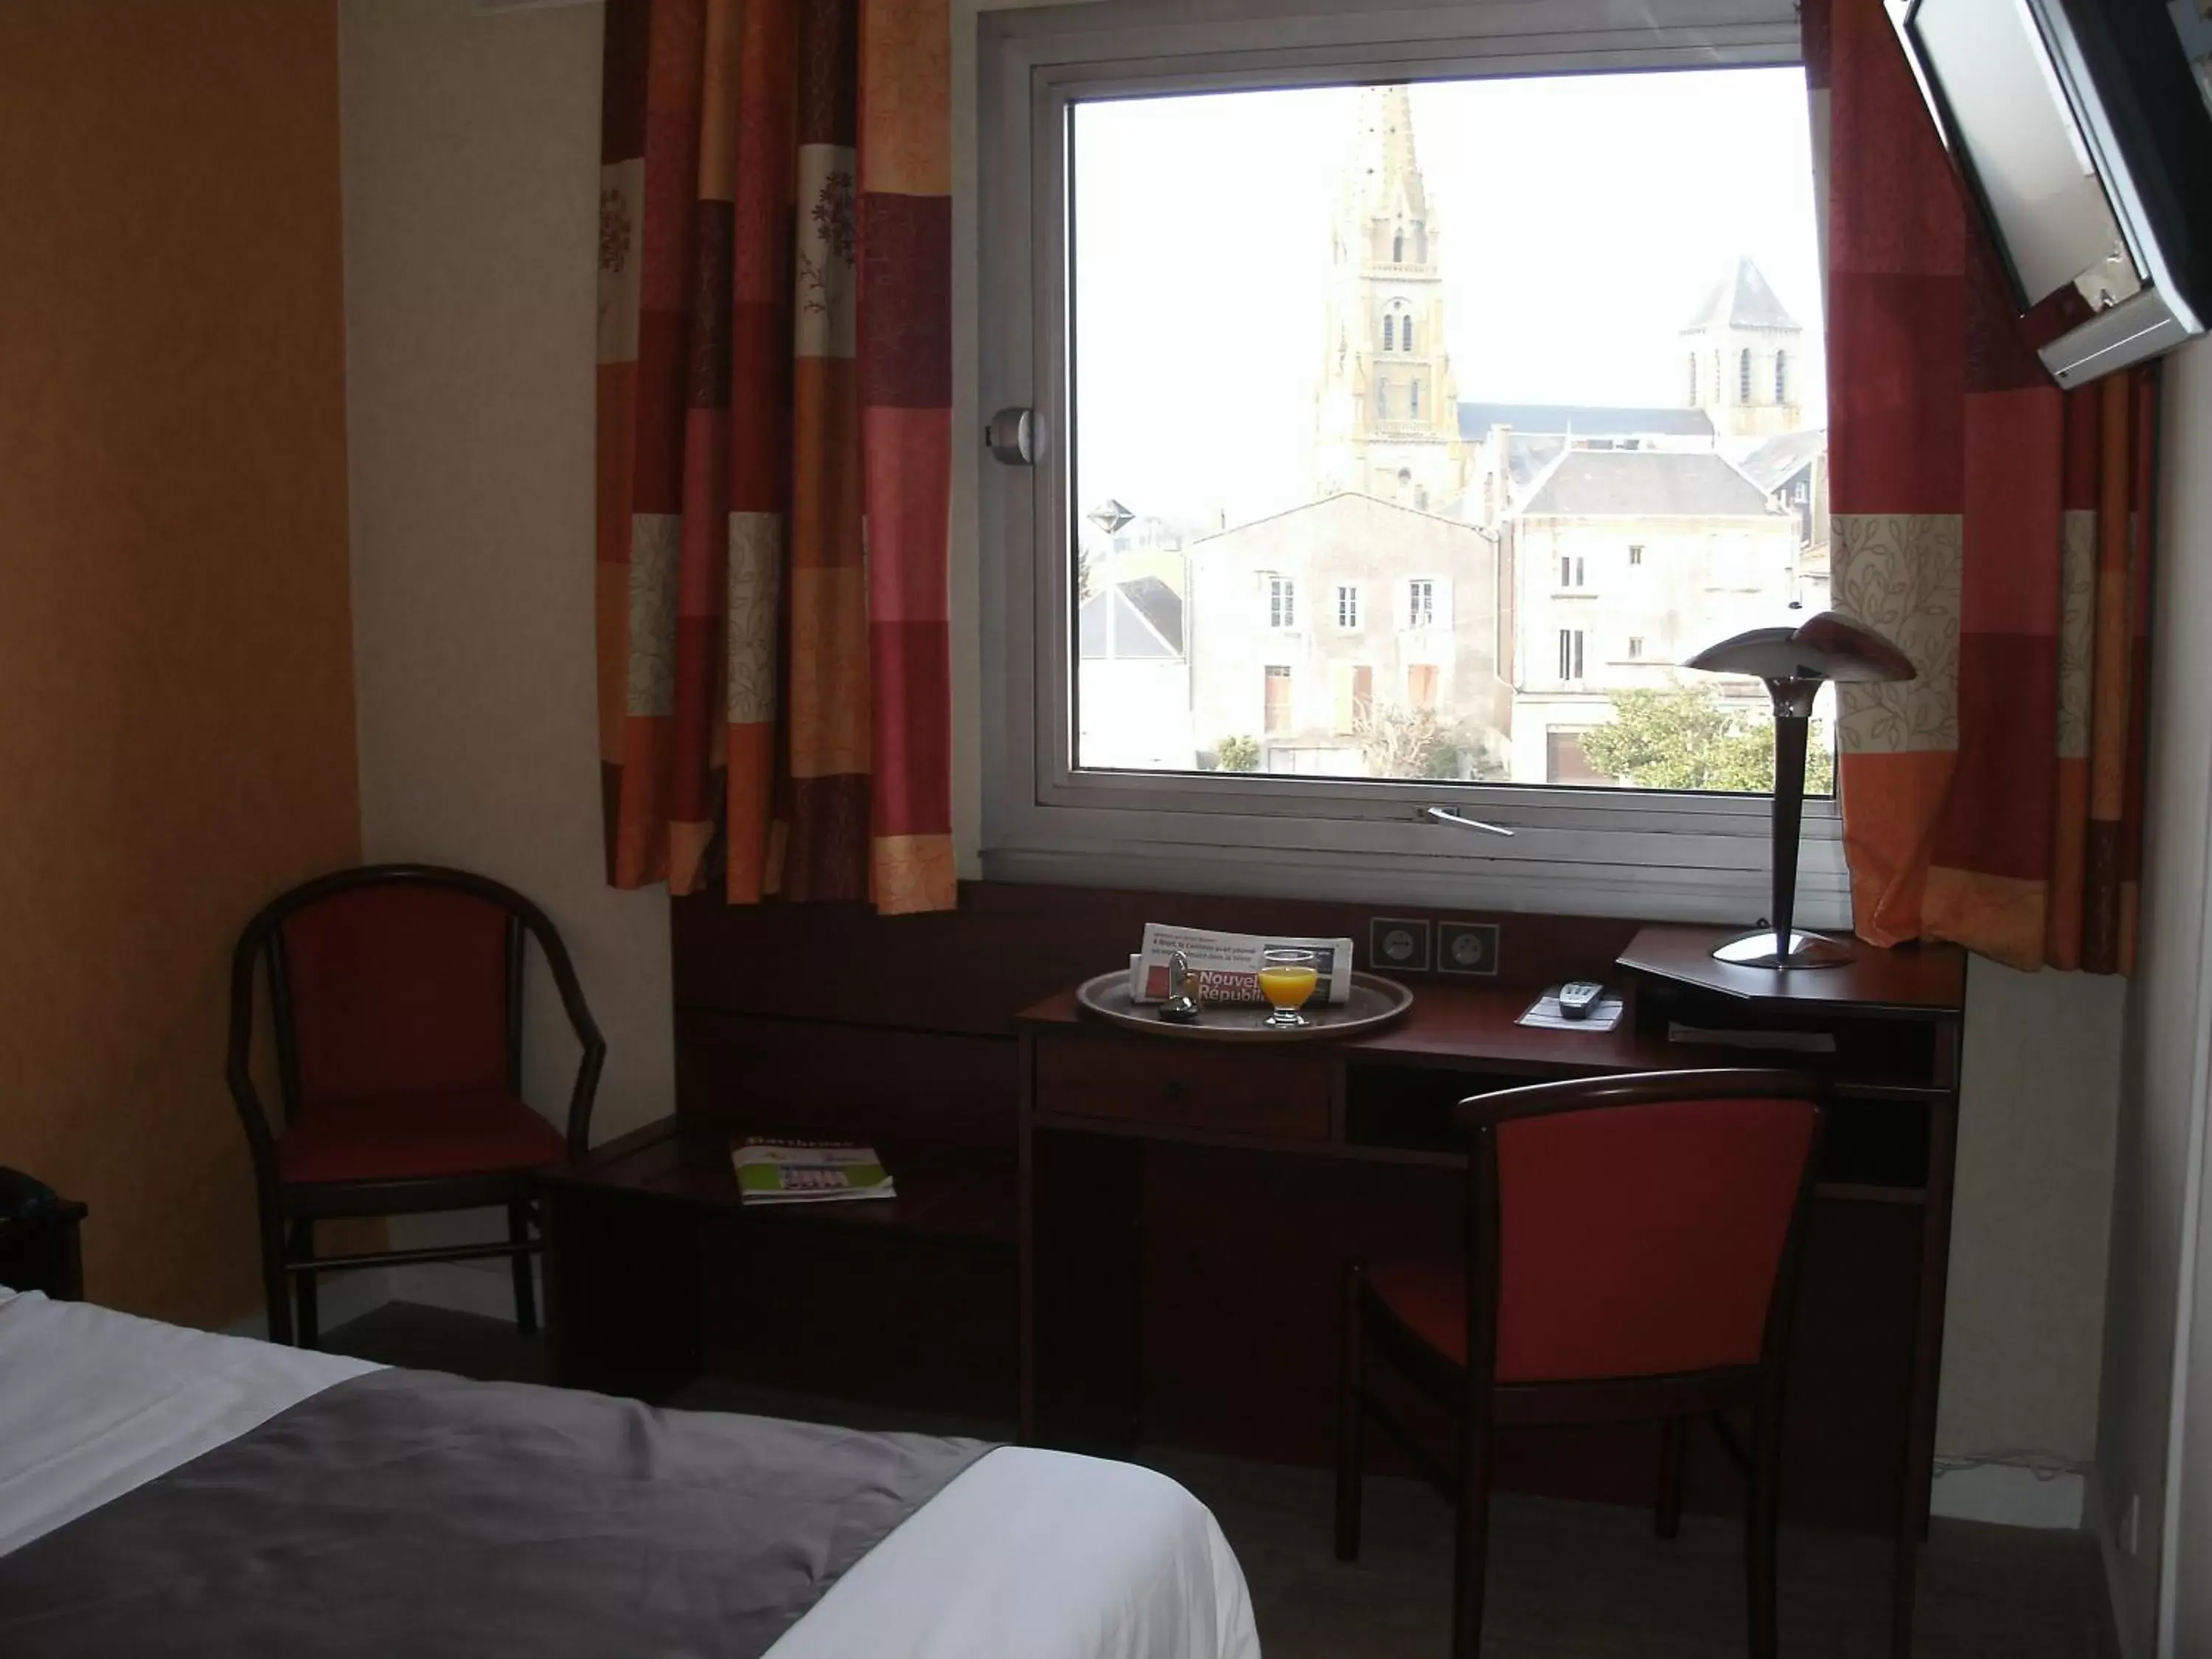 Day in Cit'Hotel Saint Jacques